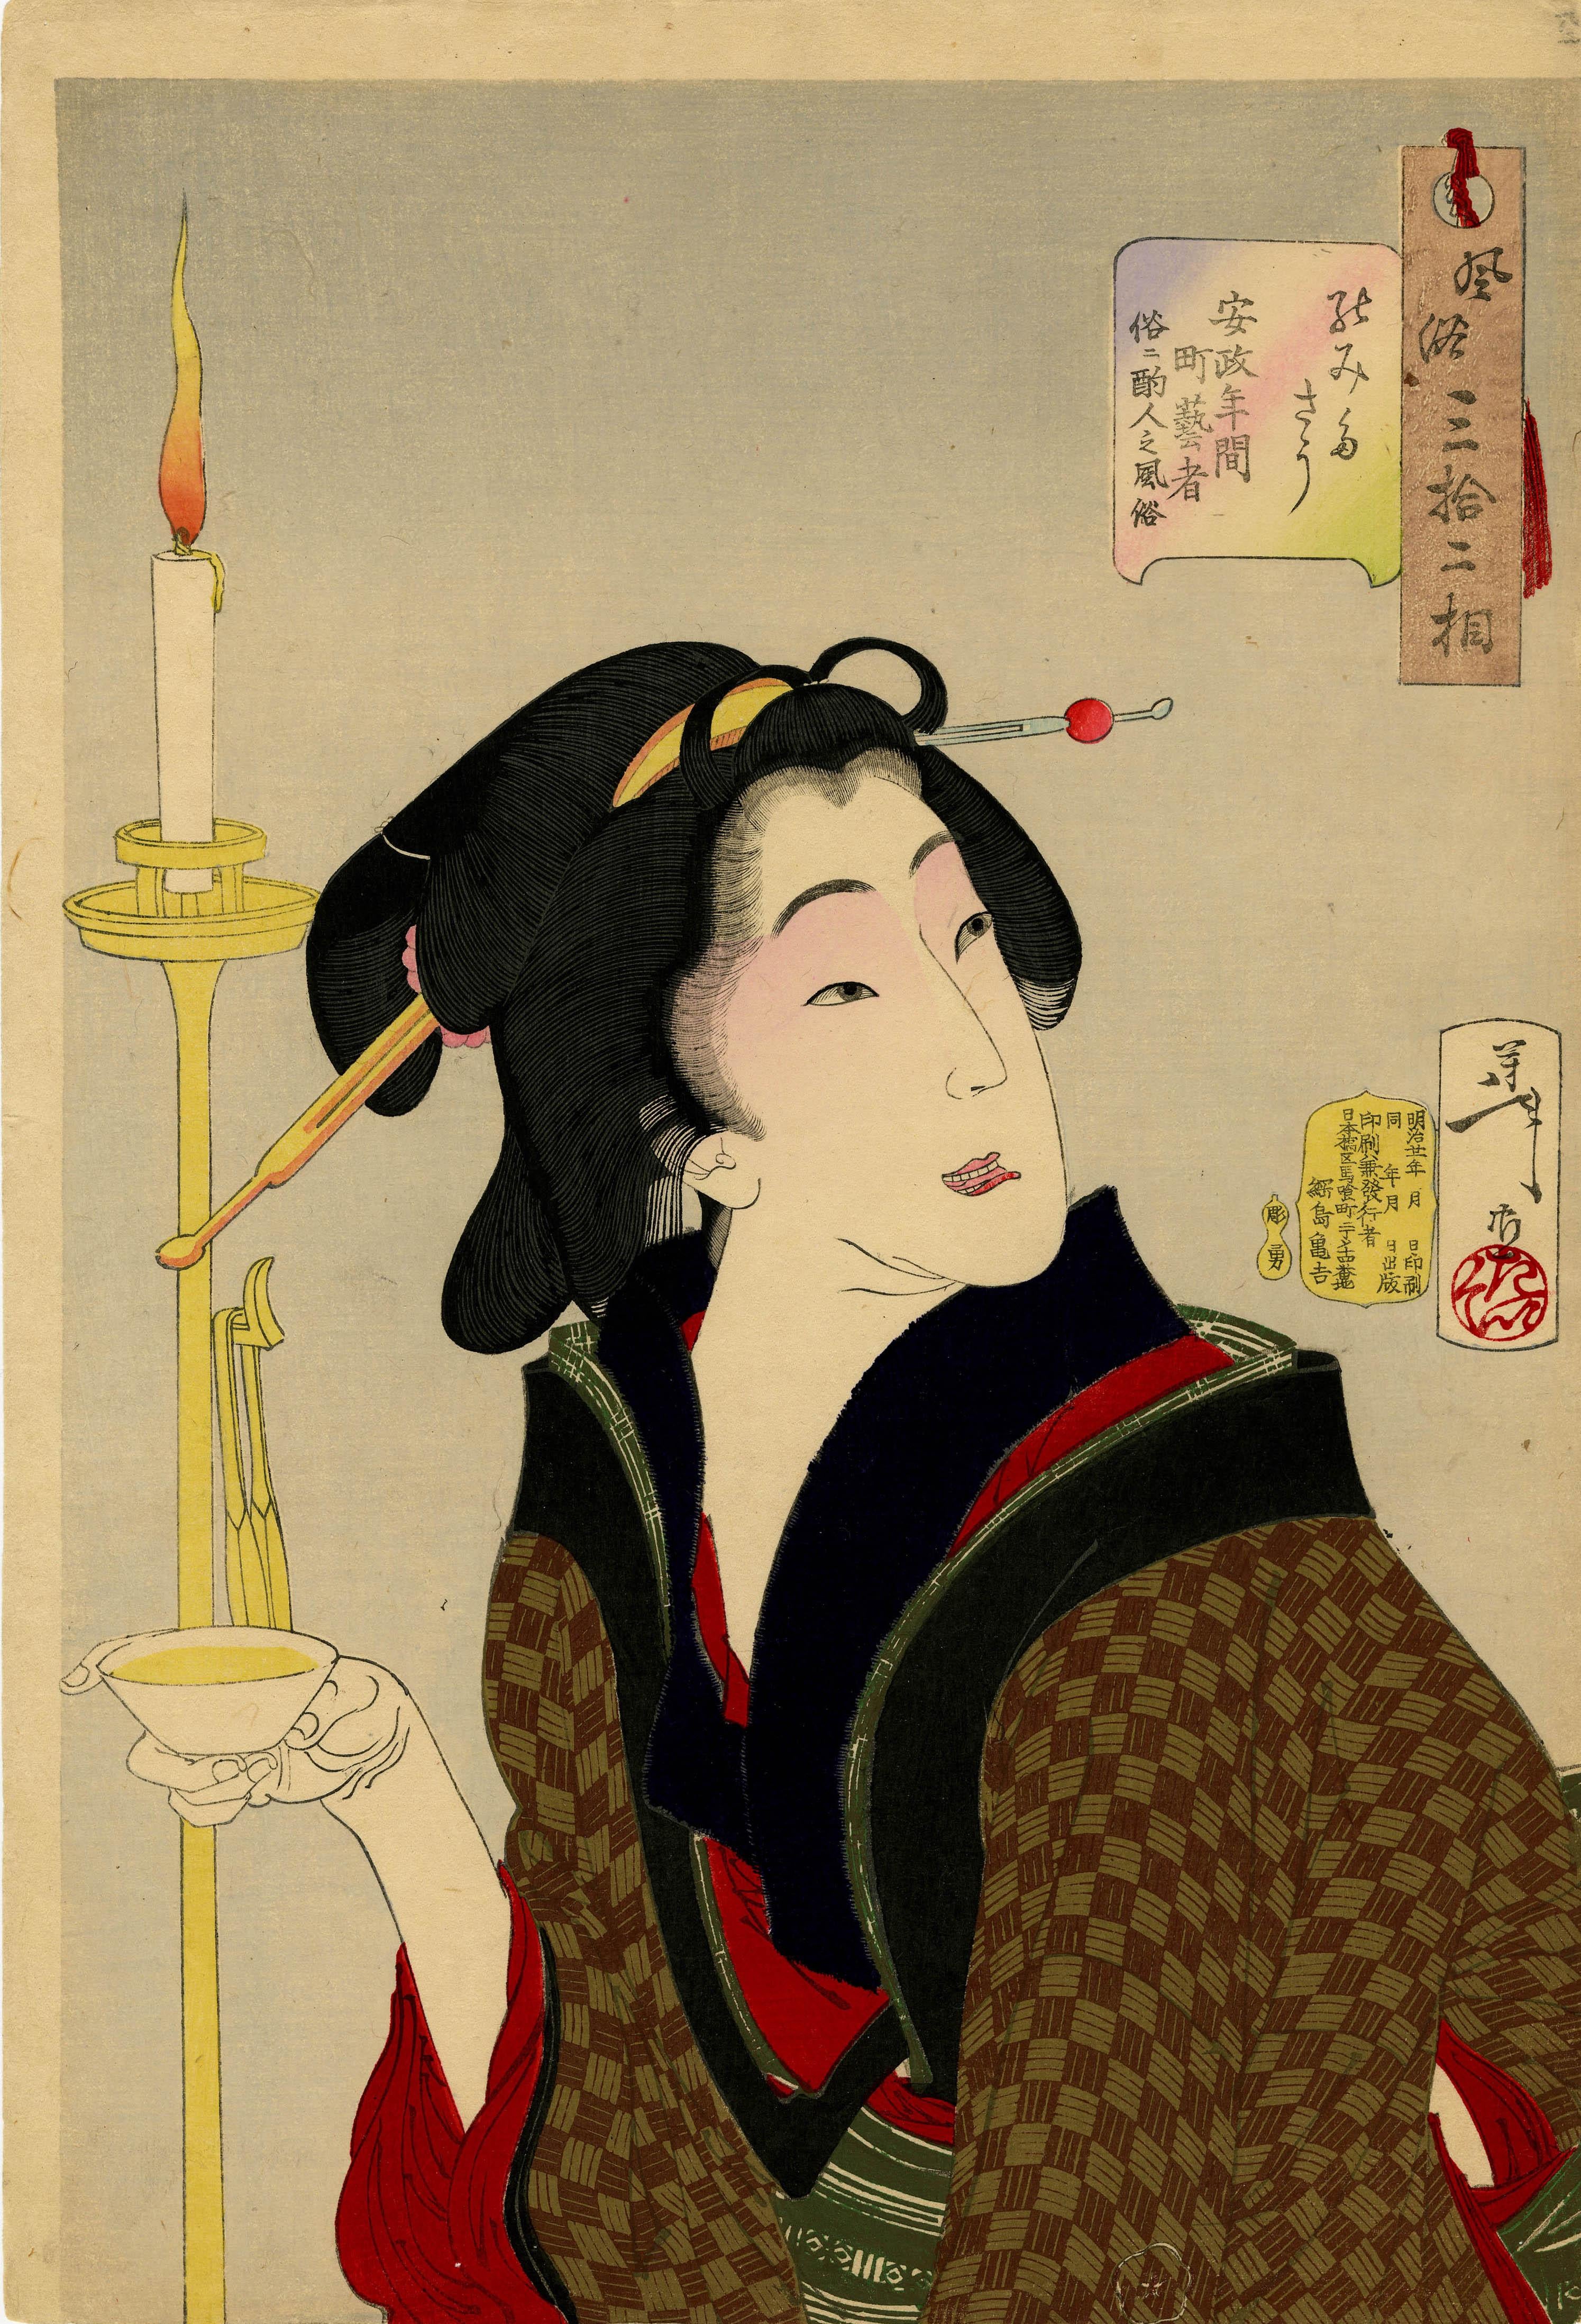 Thirsty: The Appearance of a Town Geisha - a So-Called Wine- Server - in der Anse